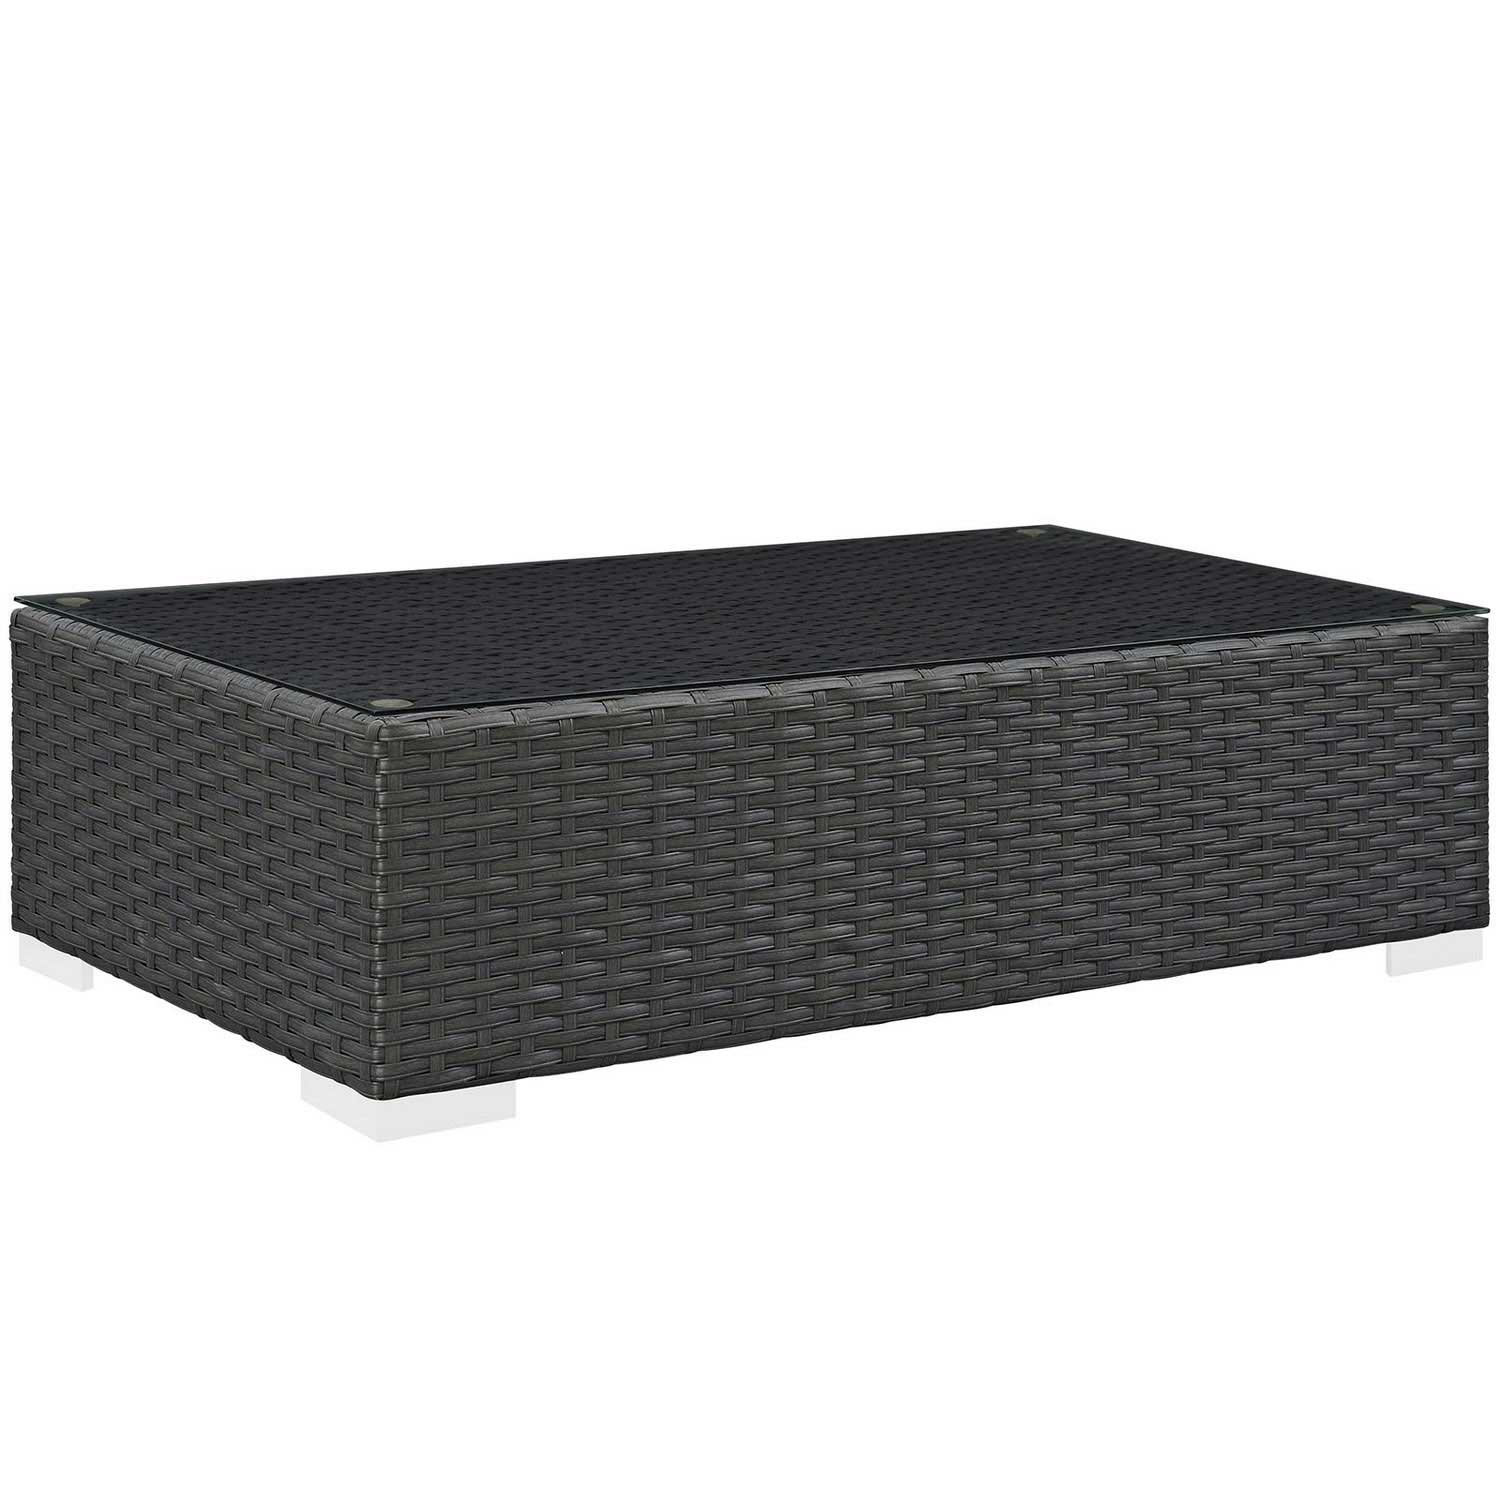 Modway Sojourn Outdoor Patio Coffee Table - Chocolate